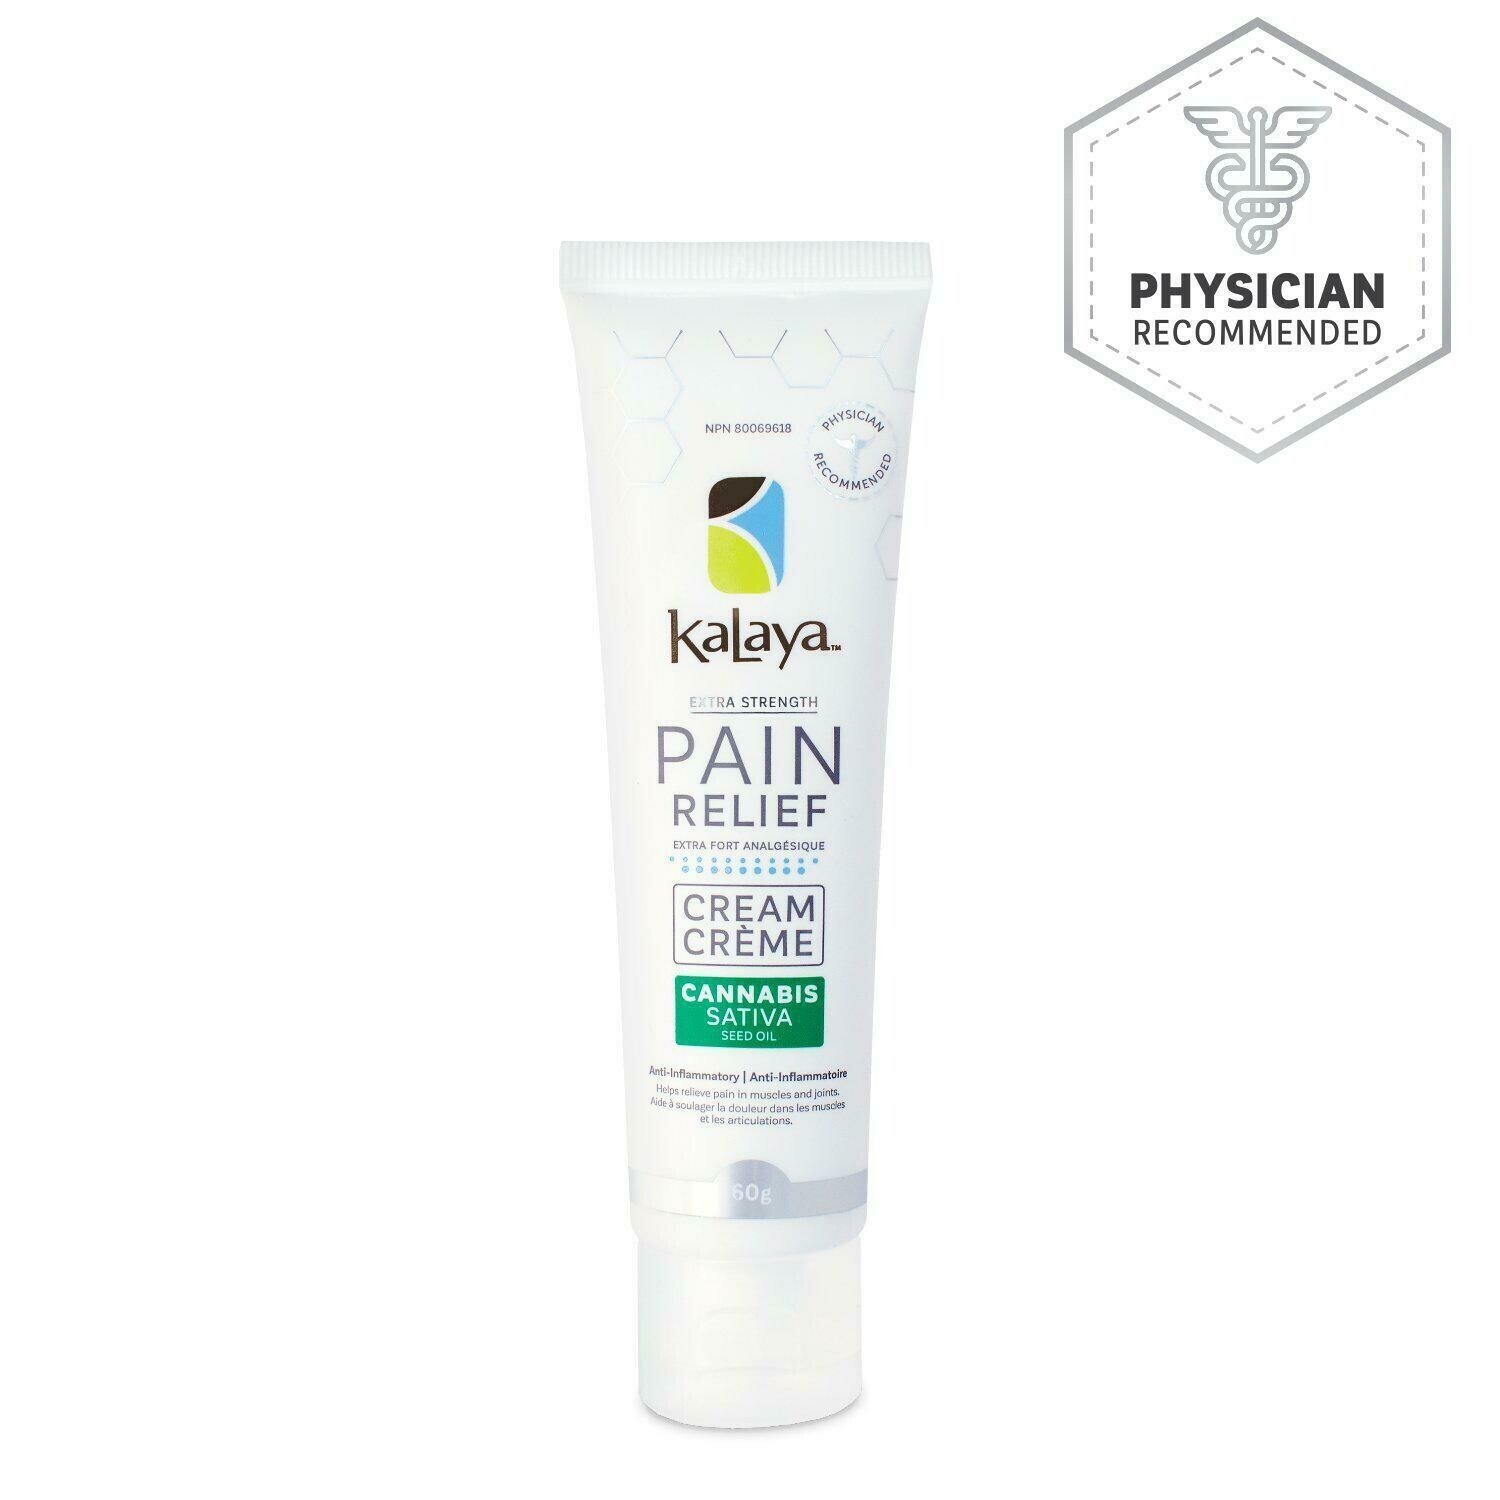 Pain Relief Creme with Cannabis Sativa Oil